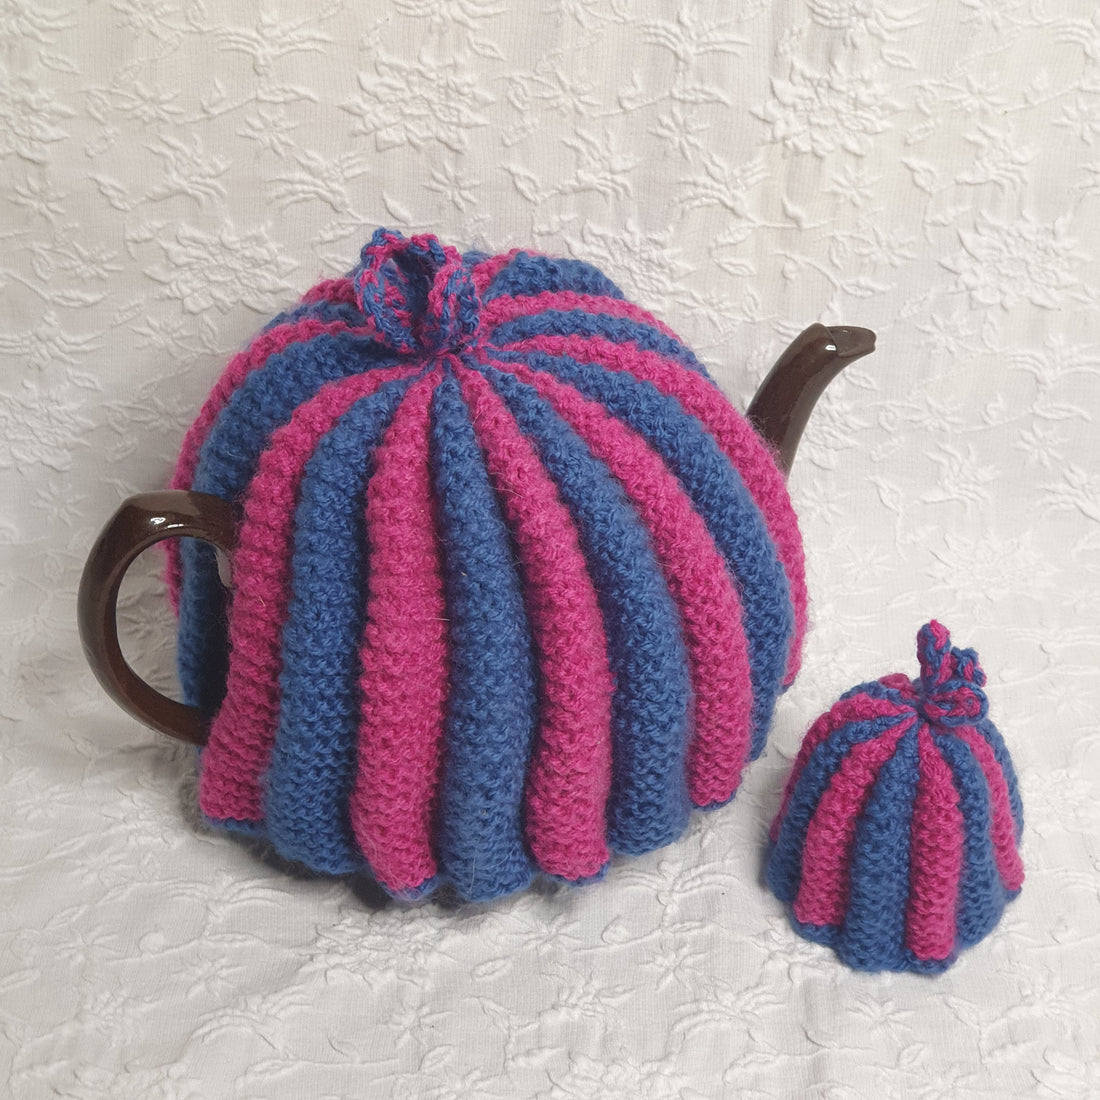 Knitted Tea & Egg Cosy